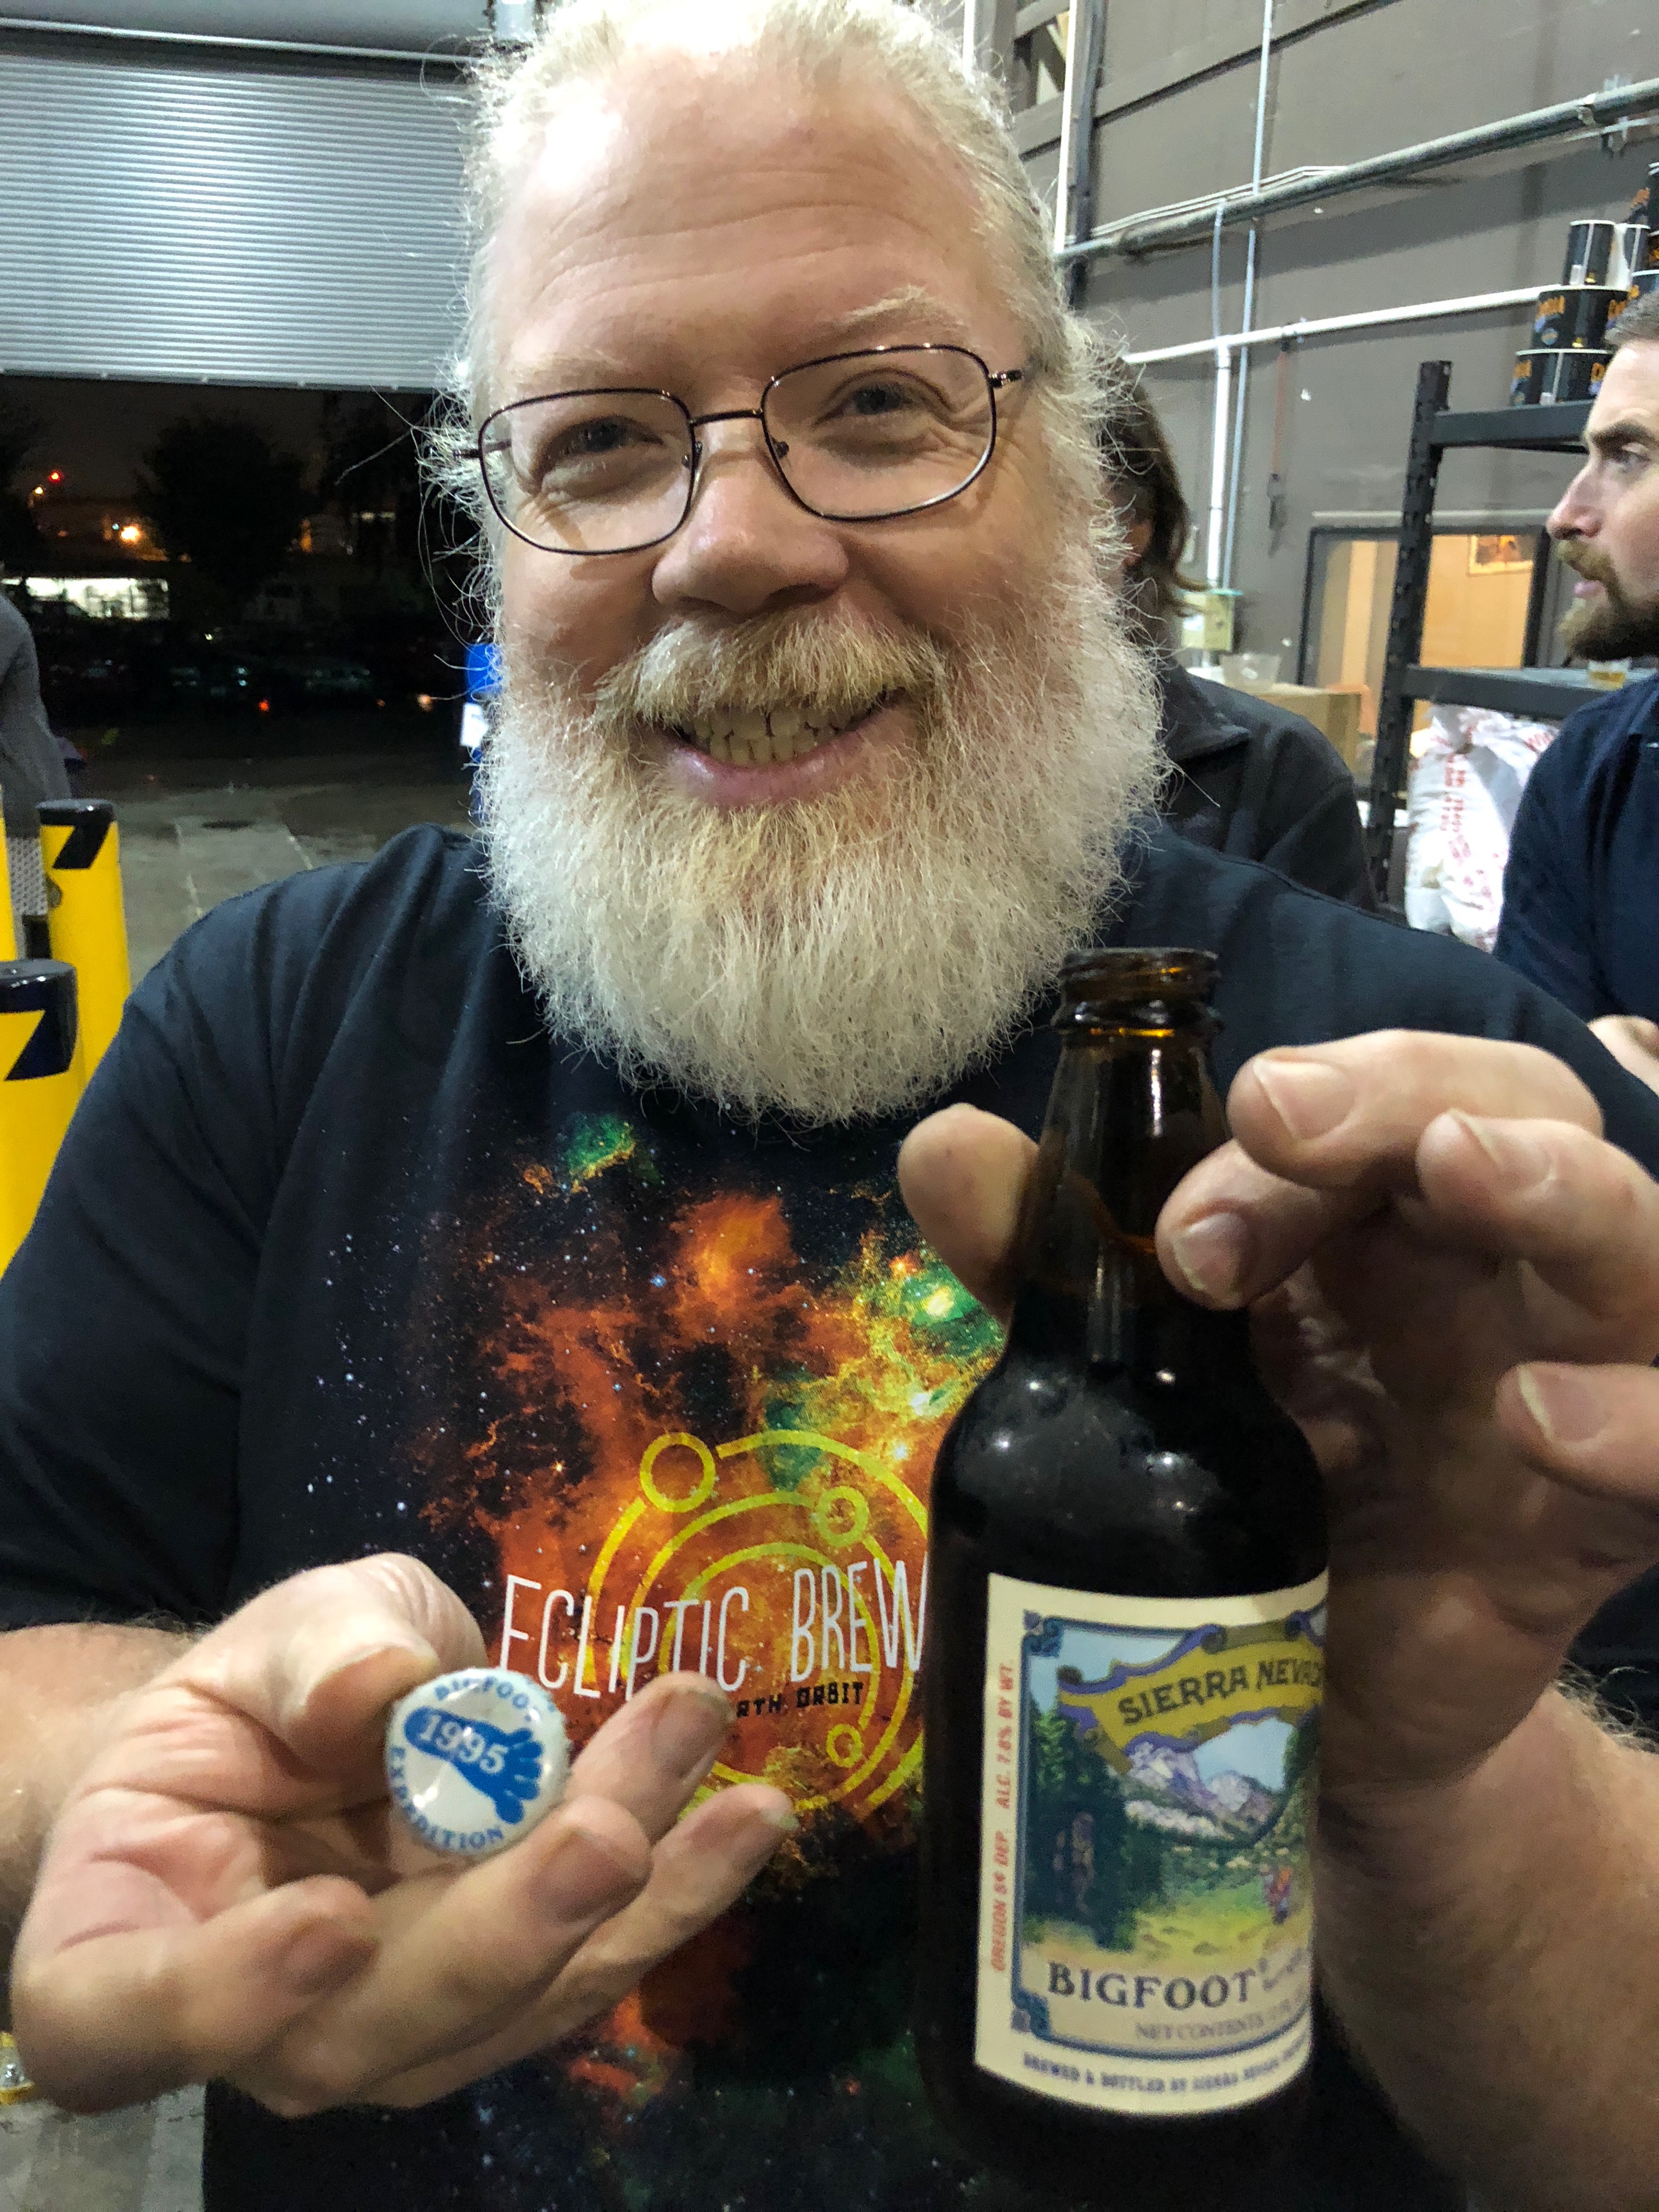 John Harris digs deep in his cellar for this Sierra Nevada Brewing Bigfoot from 1995.